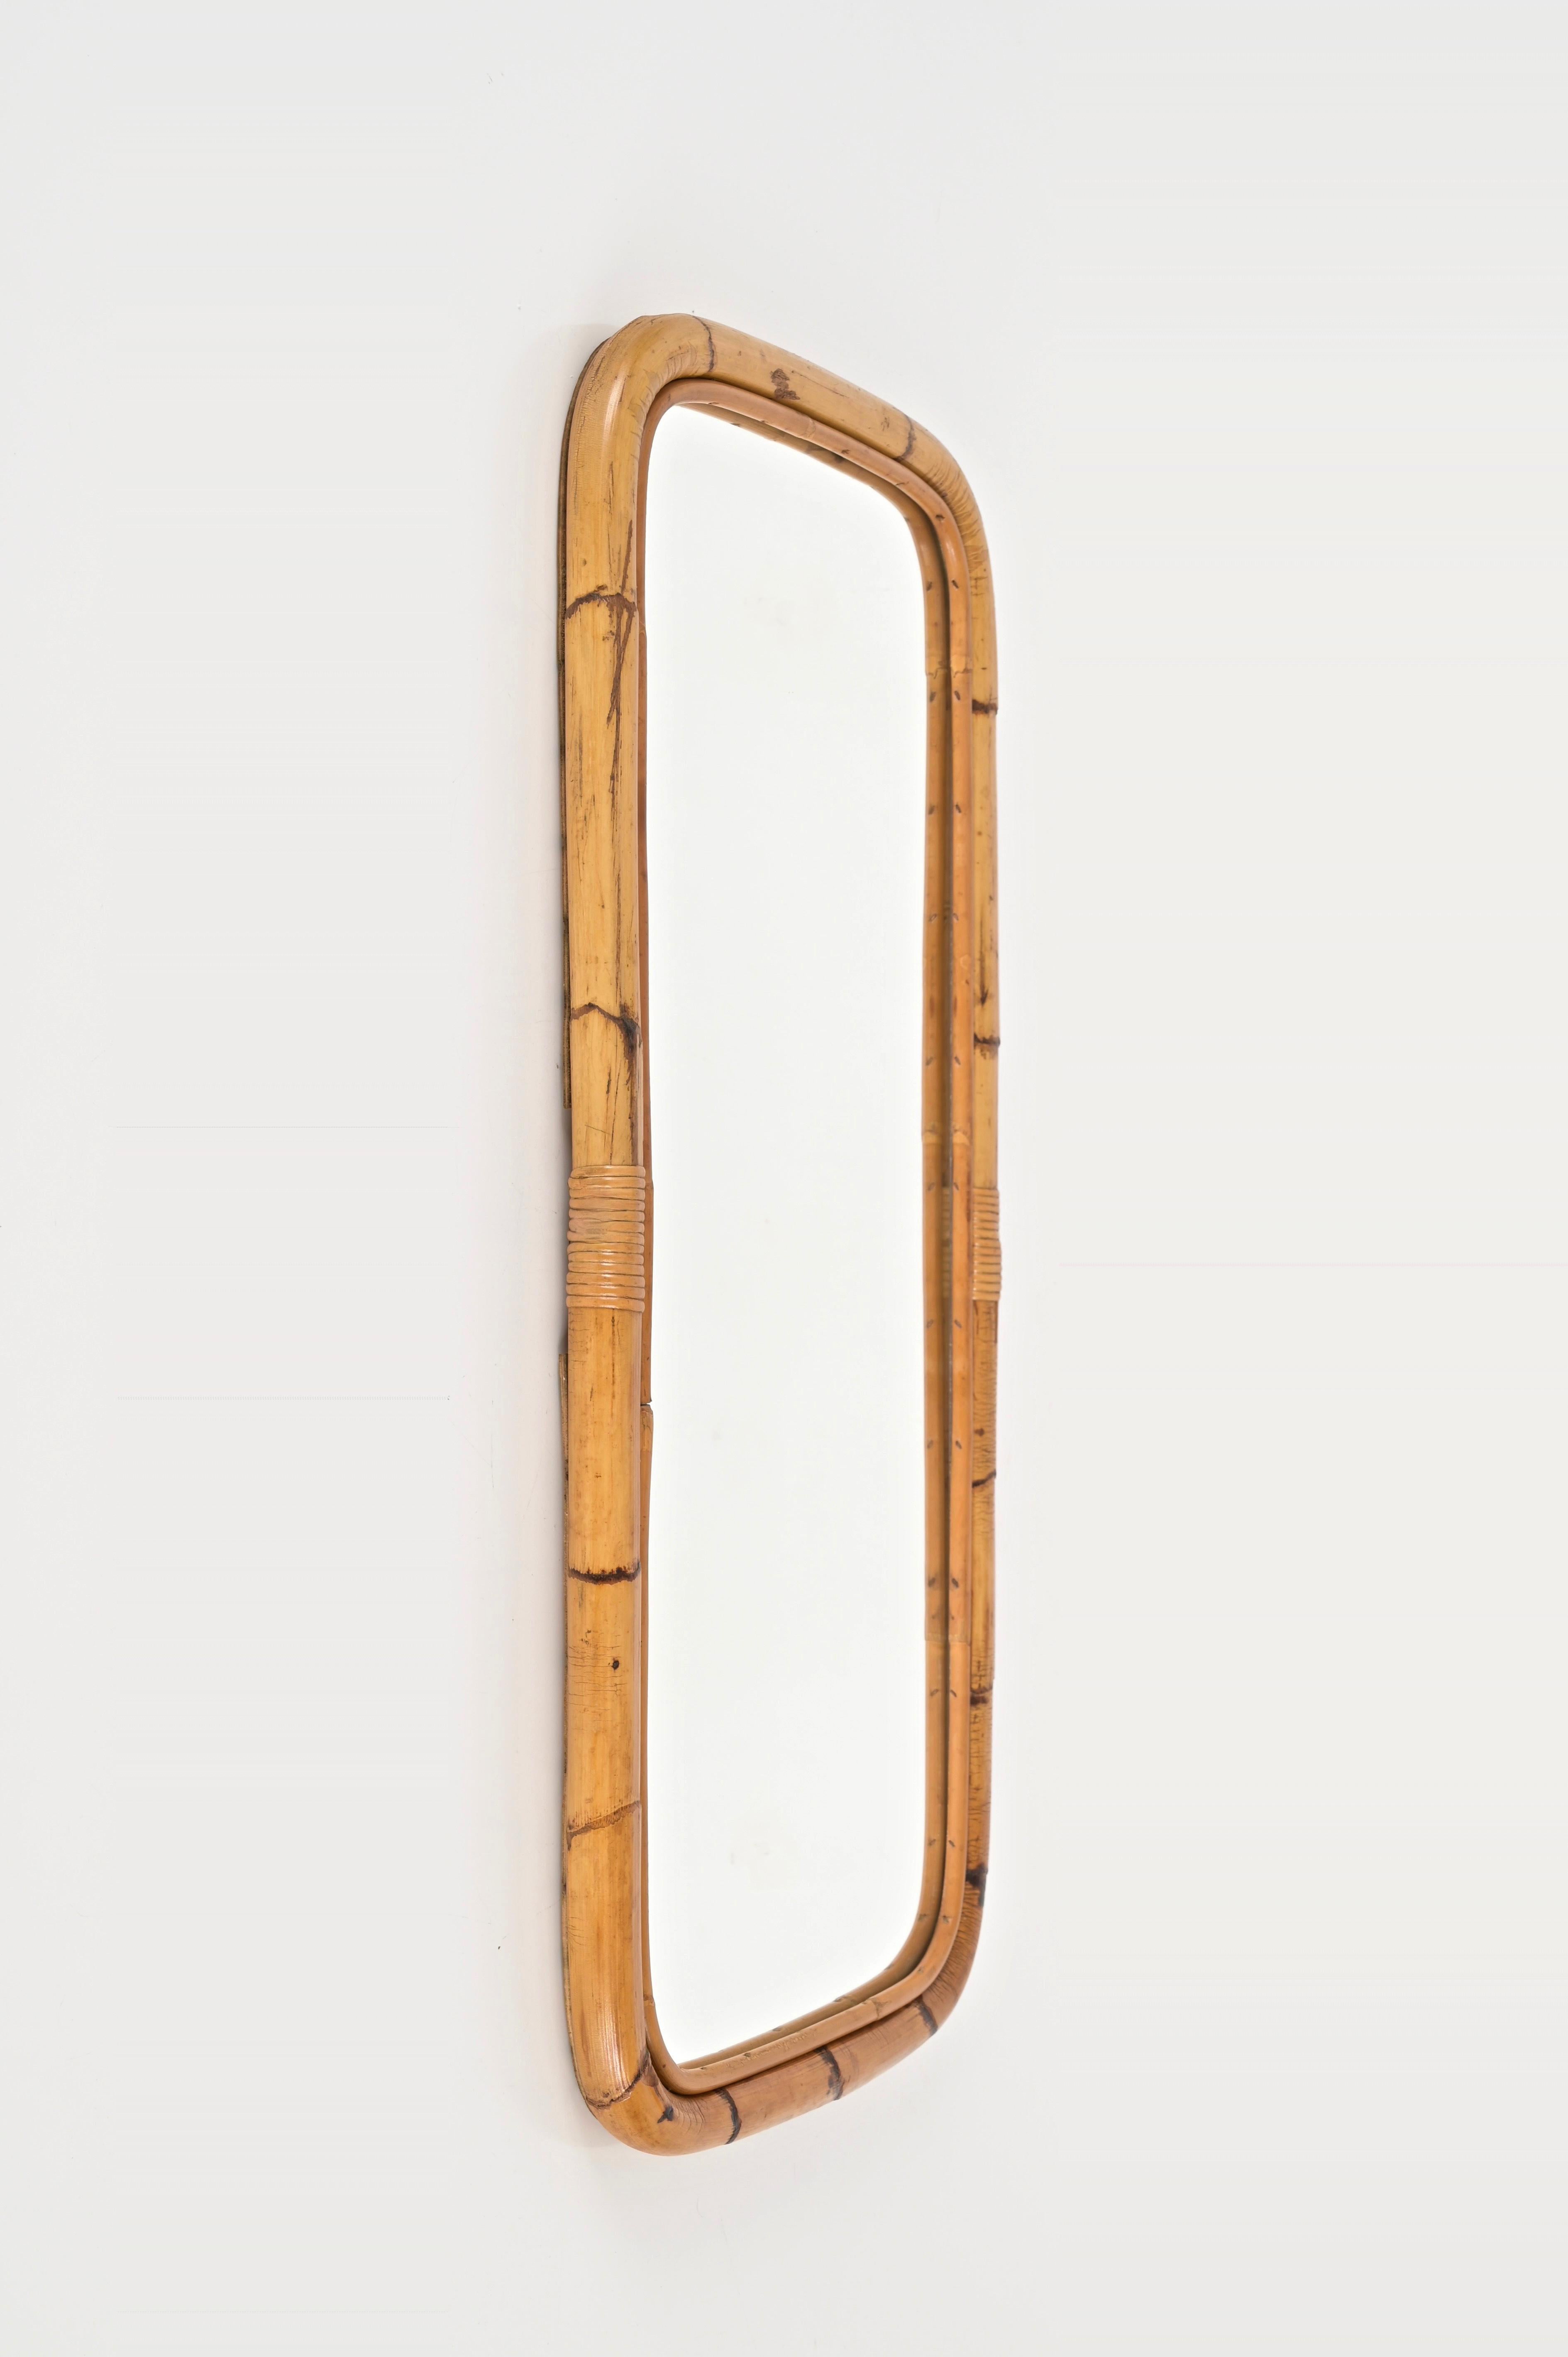 Hand-Crafted Mid-Century Italian Rectangular Mirror in Curved Bamboo, Rattan and Wicker, 1970